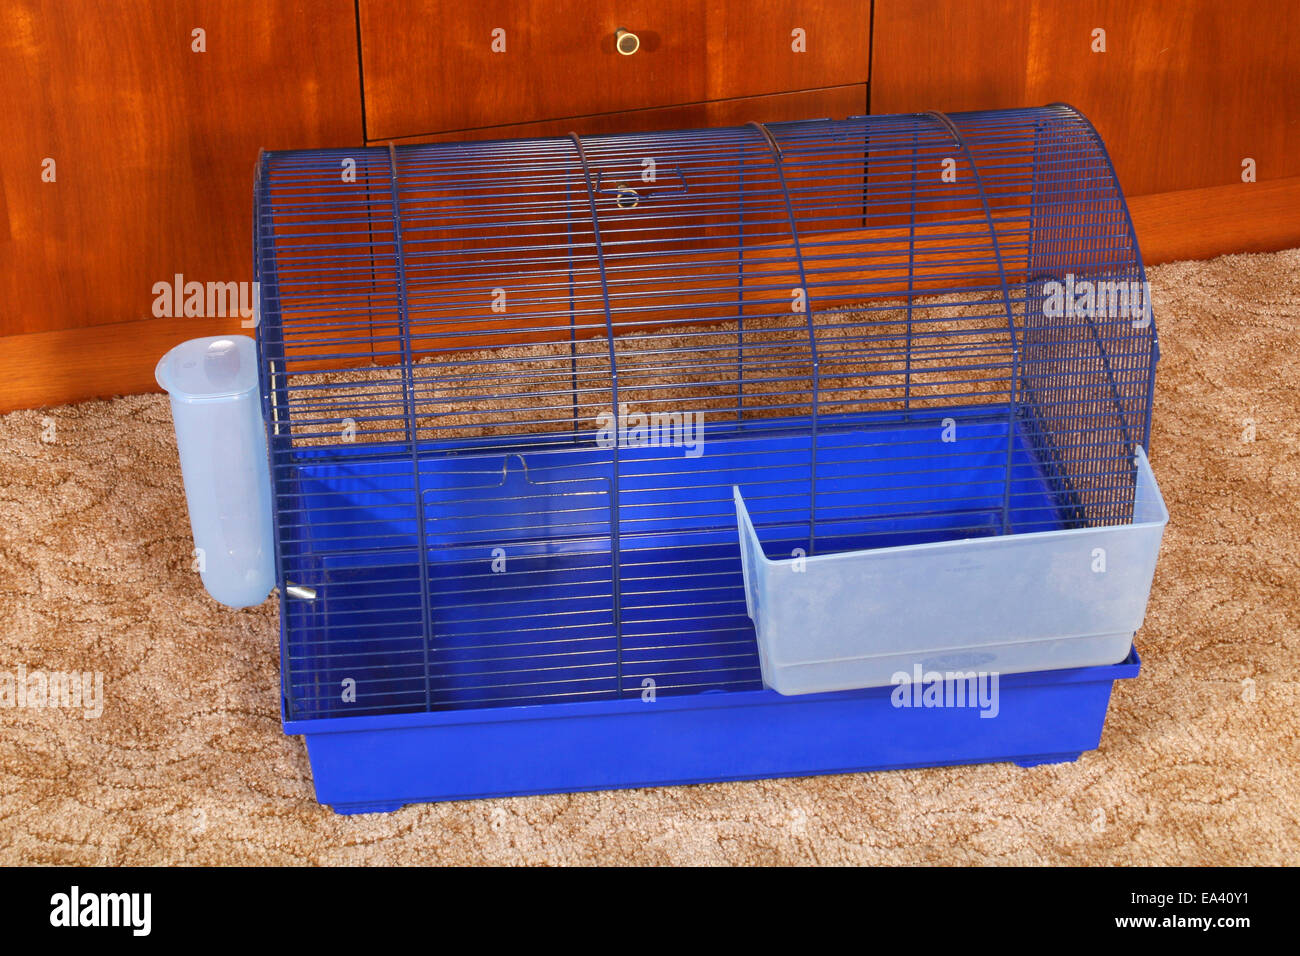 hamster cage Stock Photo